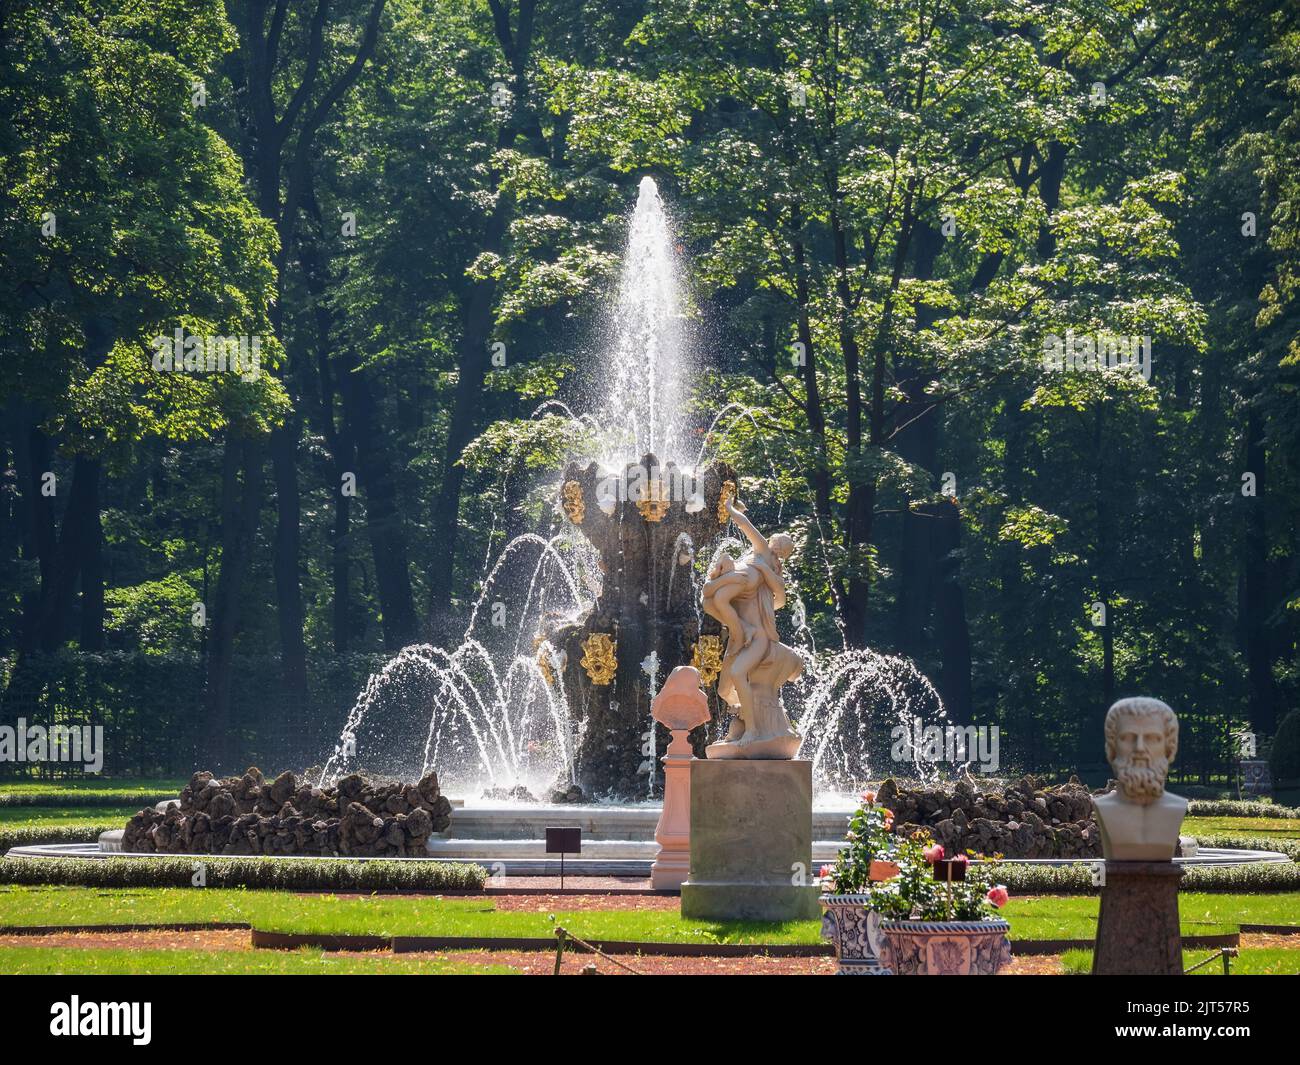 Crown fountain built in the 18th century in the Summer Garden near the Field of Mars in Saint Petersburg. Stock Photo